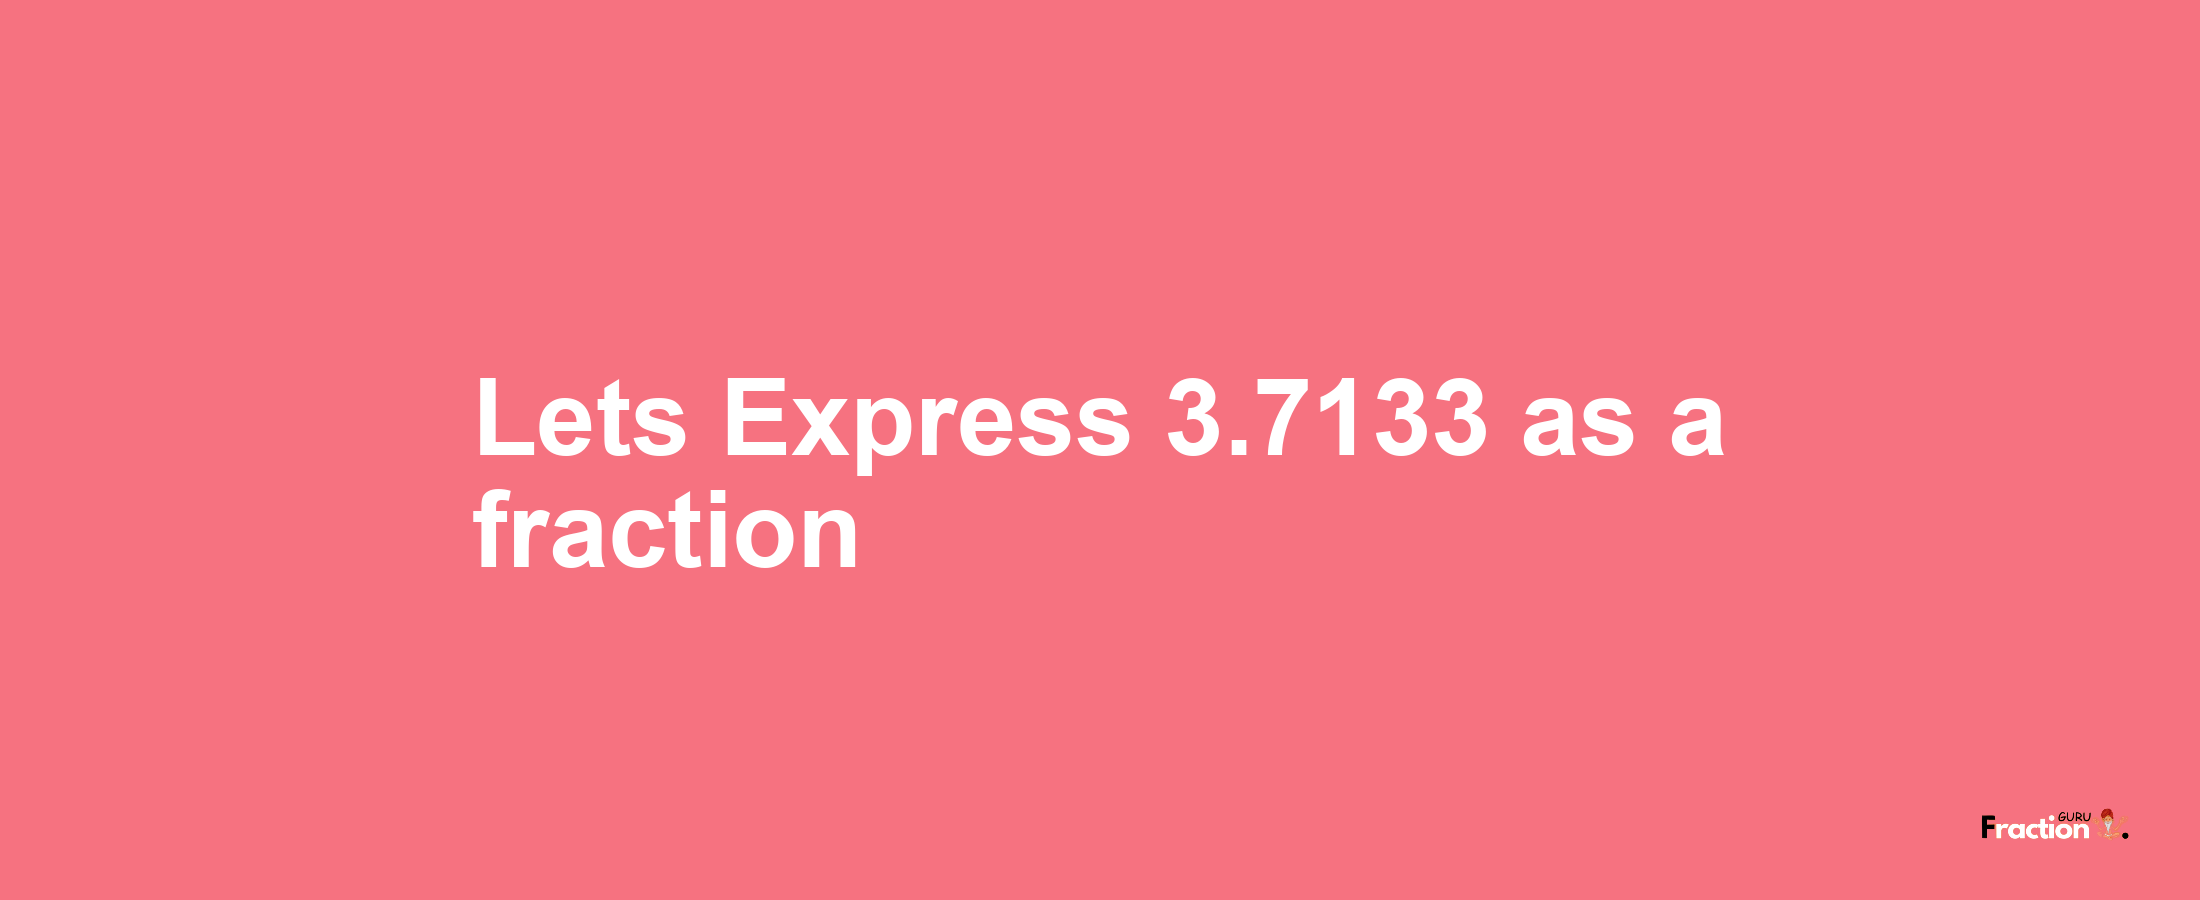 Lets Express 3.7133 as afraction